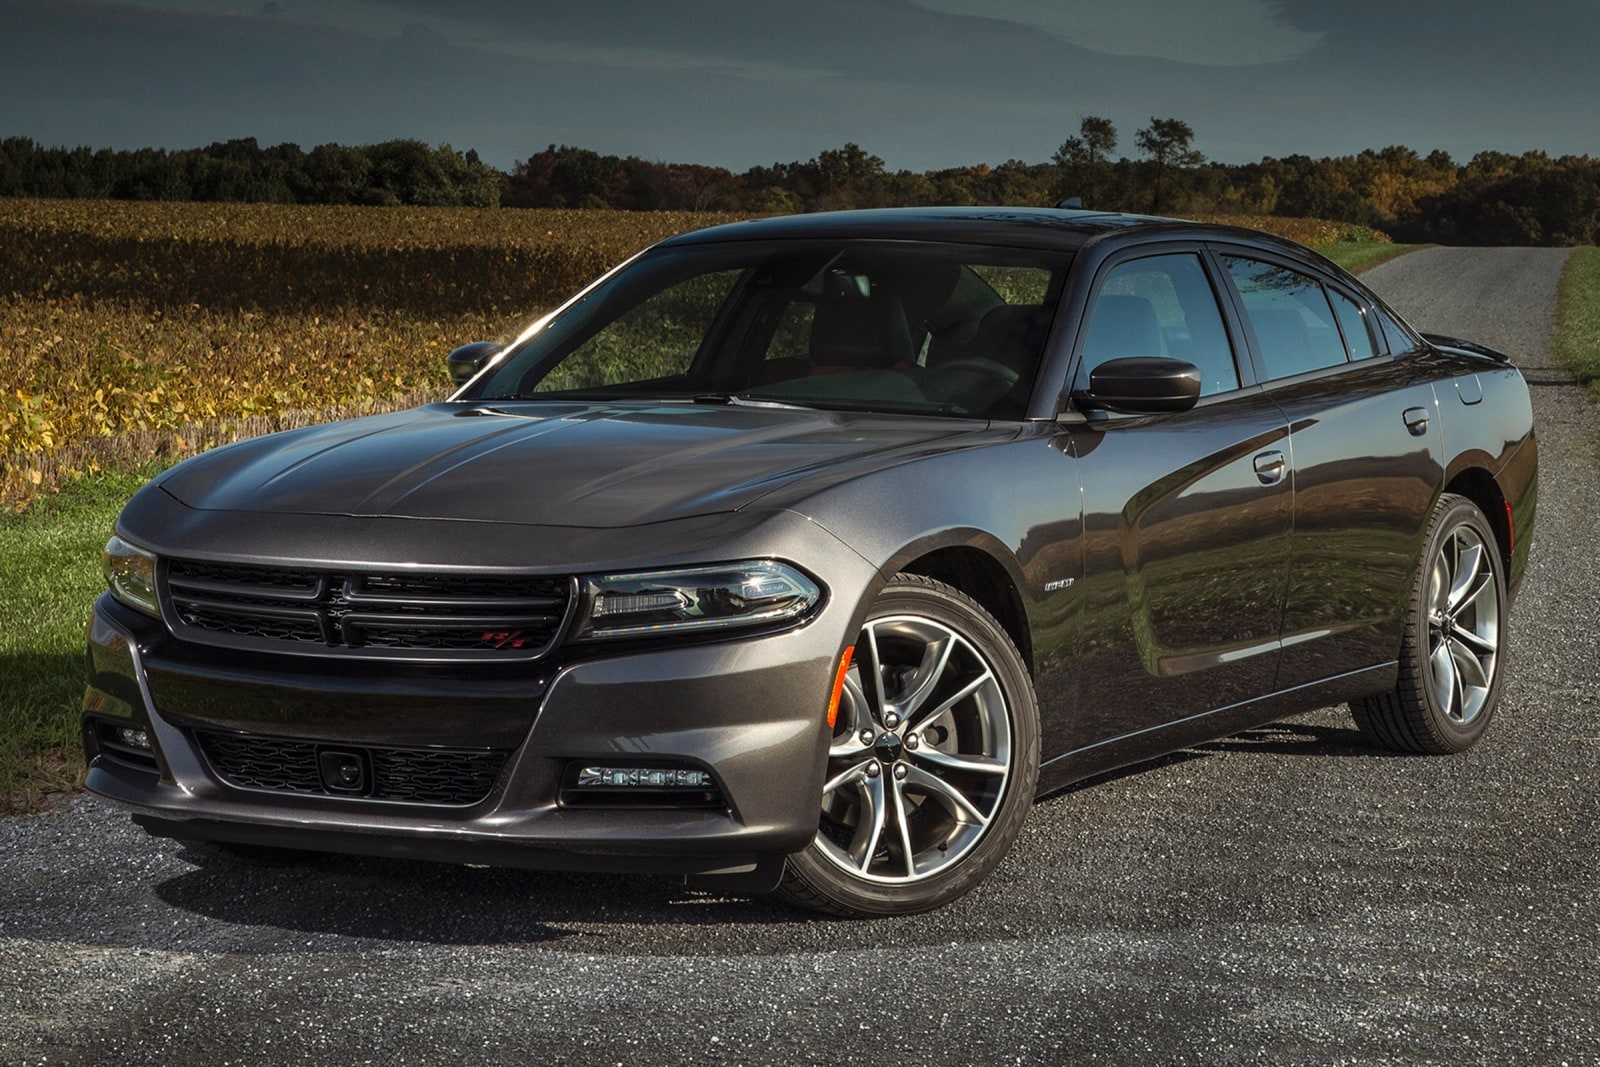 2016 Dodge Charger Review & Ratings | Edmunds